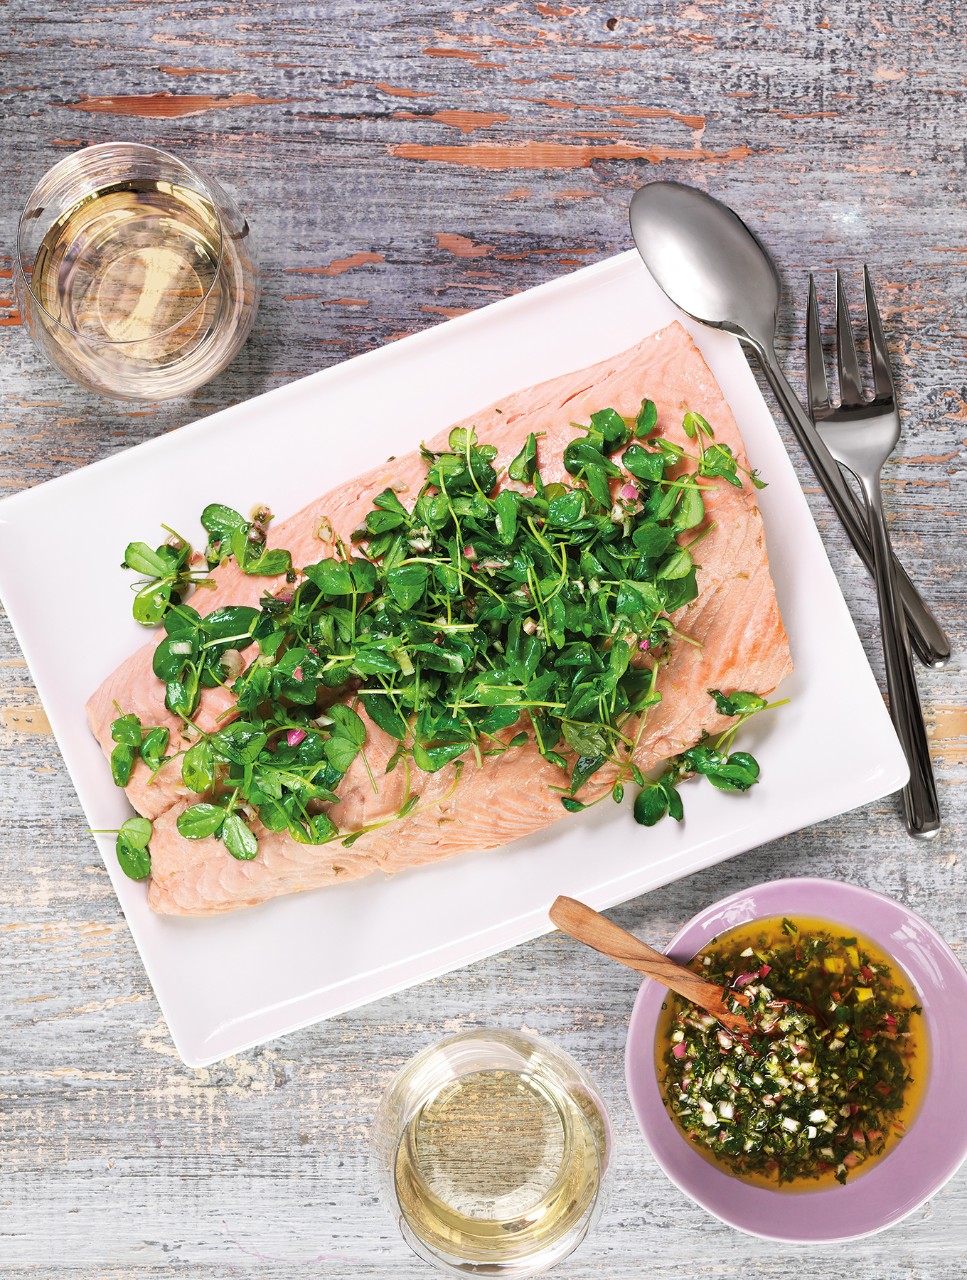 Poached Side of Salmon with Pea-Sprout Vinaigrette